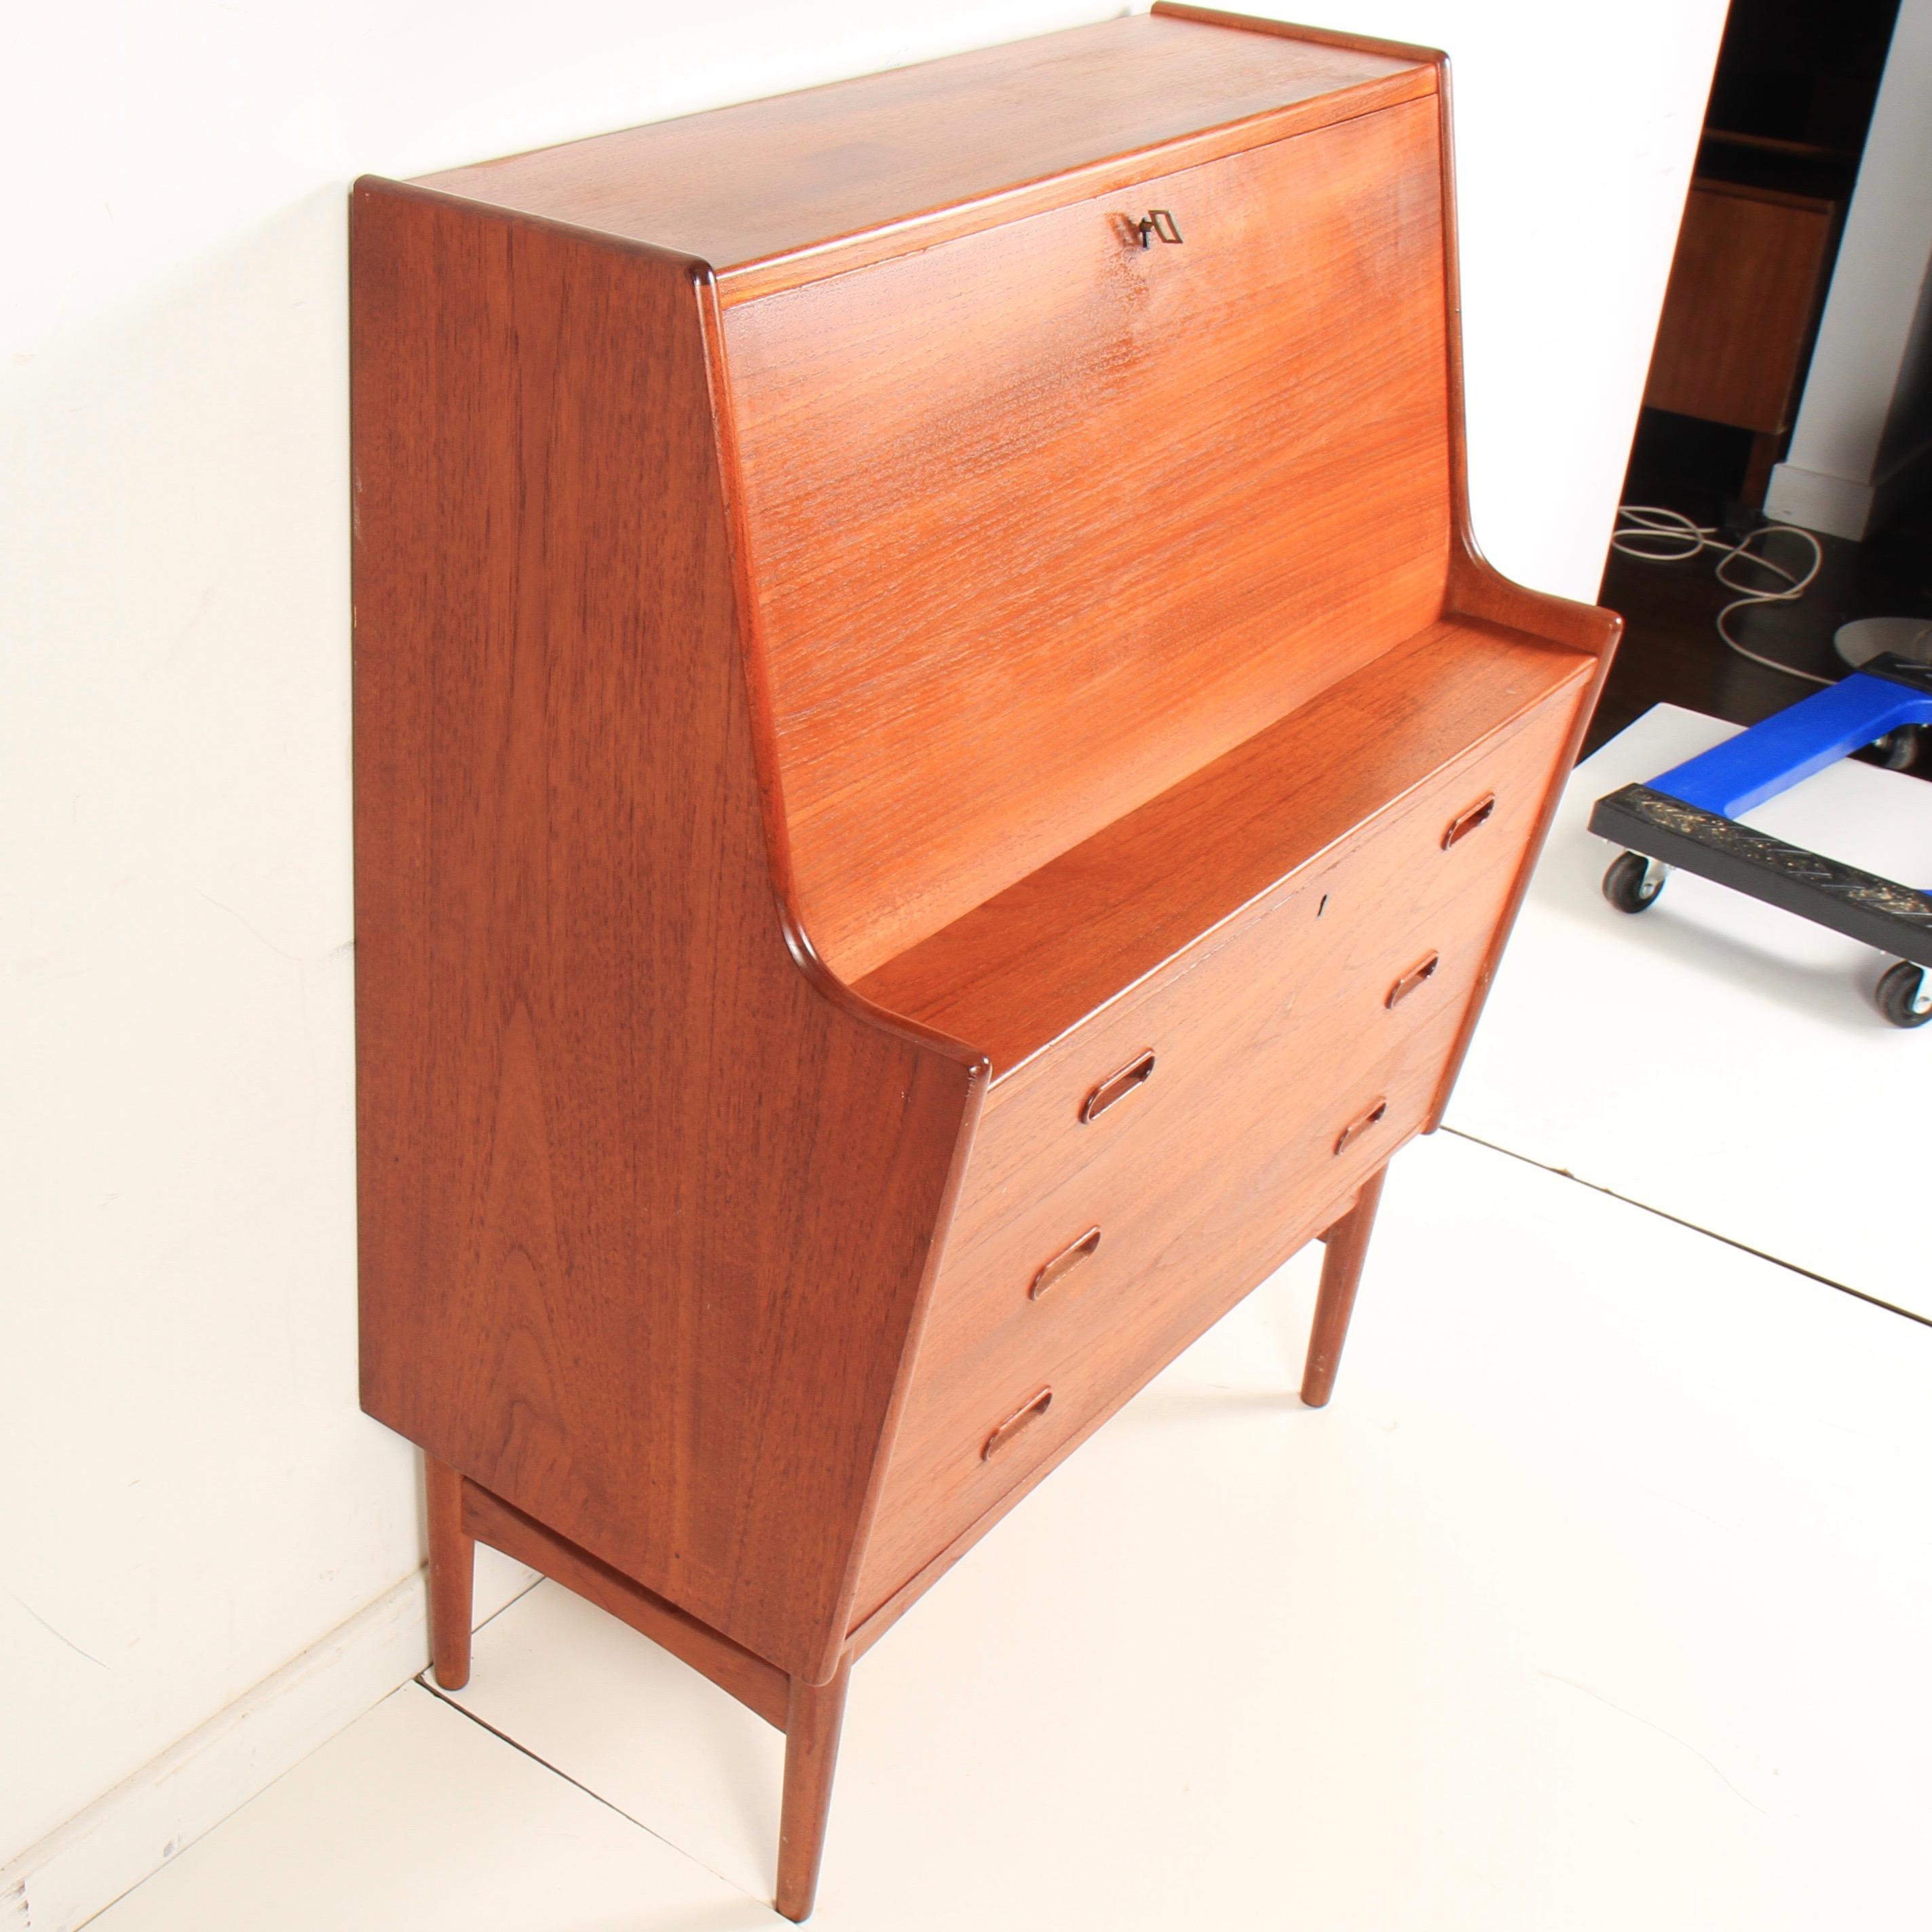 Danish drop front desk model 37 by Arne Wahl Iversen for Vinde Møbelfabrik, 1960s. Classic Danish Mid-Century Modern secretary in teak with drop down tabletop, and built in lamp. Both top and bottom drawers lock with original key included. Base is